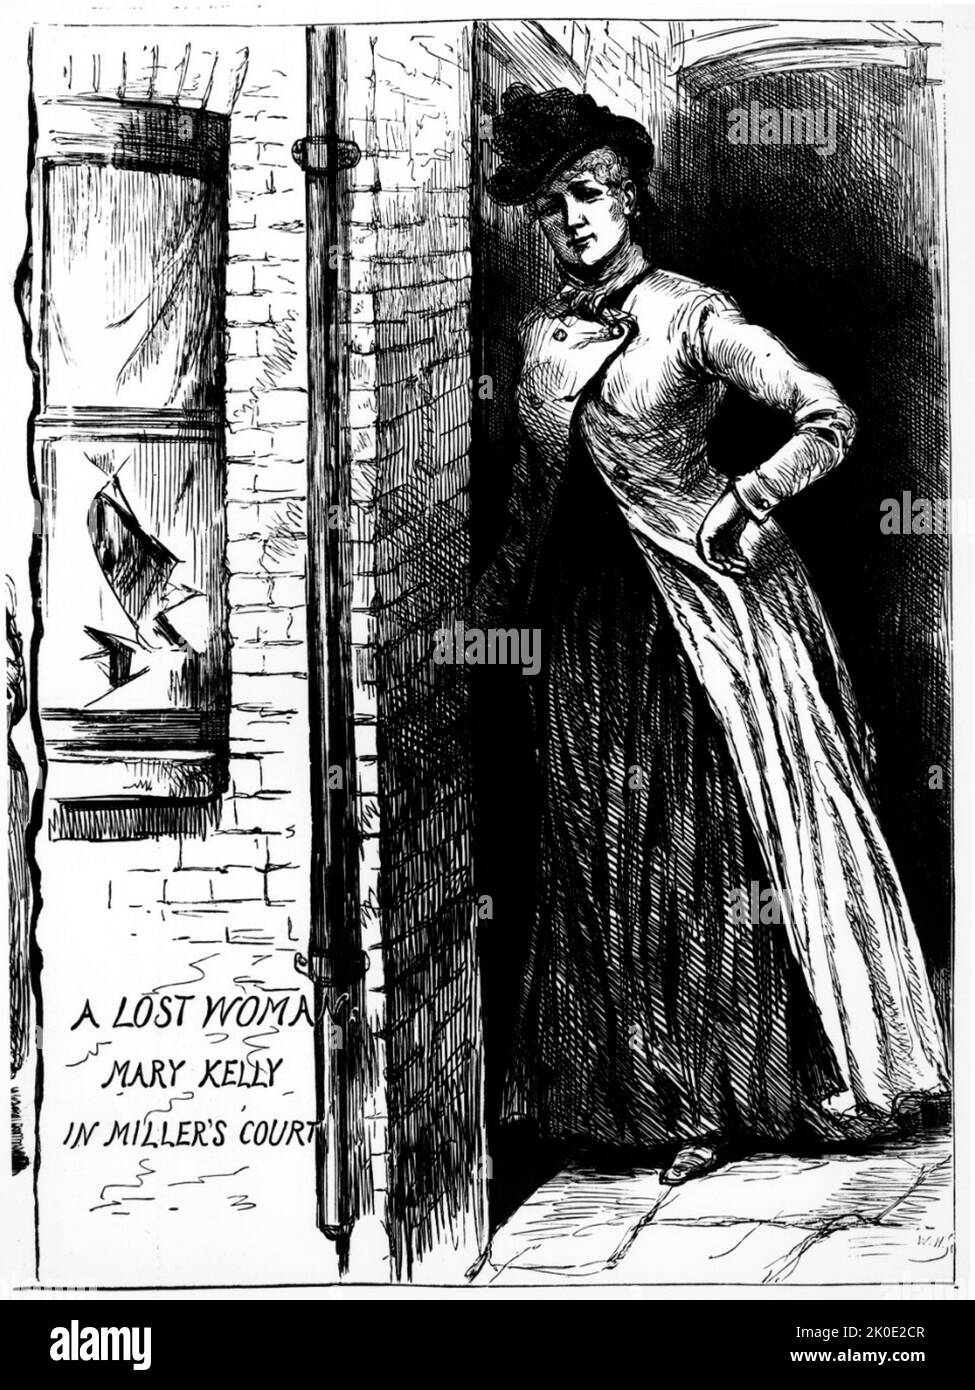 Annie Chapman (1840 - 8 September 1888) second victim of the notorious unidentified serial killer Jack the Ripper, who killed and mutilated a minimum of five women in the Whitechapel and Spitalfields districts of London from late August to early November 1888. Stock Photo